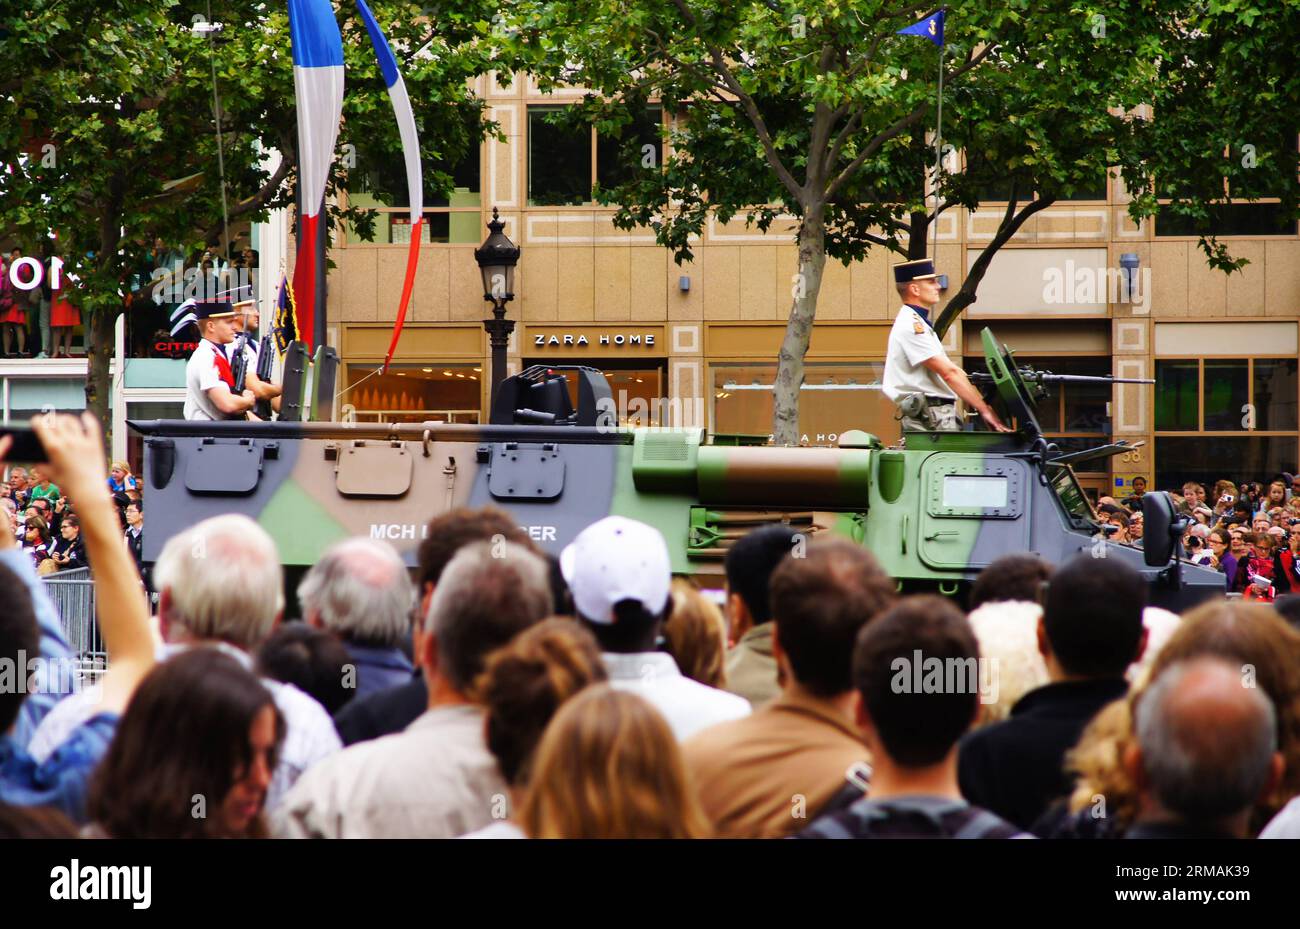 (140714) -- PARIS, July 14, 2014 (Xinhua) -- People watch the annual Bastille Day military parade on the Champs Elysees Avenue in Paris, France, on July 14, 2014. France celebrated National Day with a grand parade, which was participated by troops from 80 nations. (Xinhua/Li Genxing) FRANCE-PARIS-BASTILLE DAY-MILITARY PARADE PUBLICATIONxNOTxINxCHN   Paris July 14 2014 XINHUA Celebrities Watch The Annual Bastille Day Military Parade ON The Champs Elysees Avenue in Paris France ON July 14 2014 France celebrated National Day With a Grand Parade Which what participated by Troops from 80 Nations XI Stock Photo